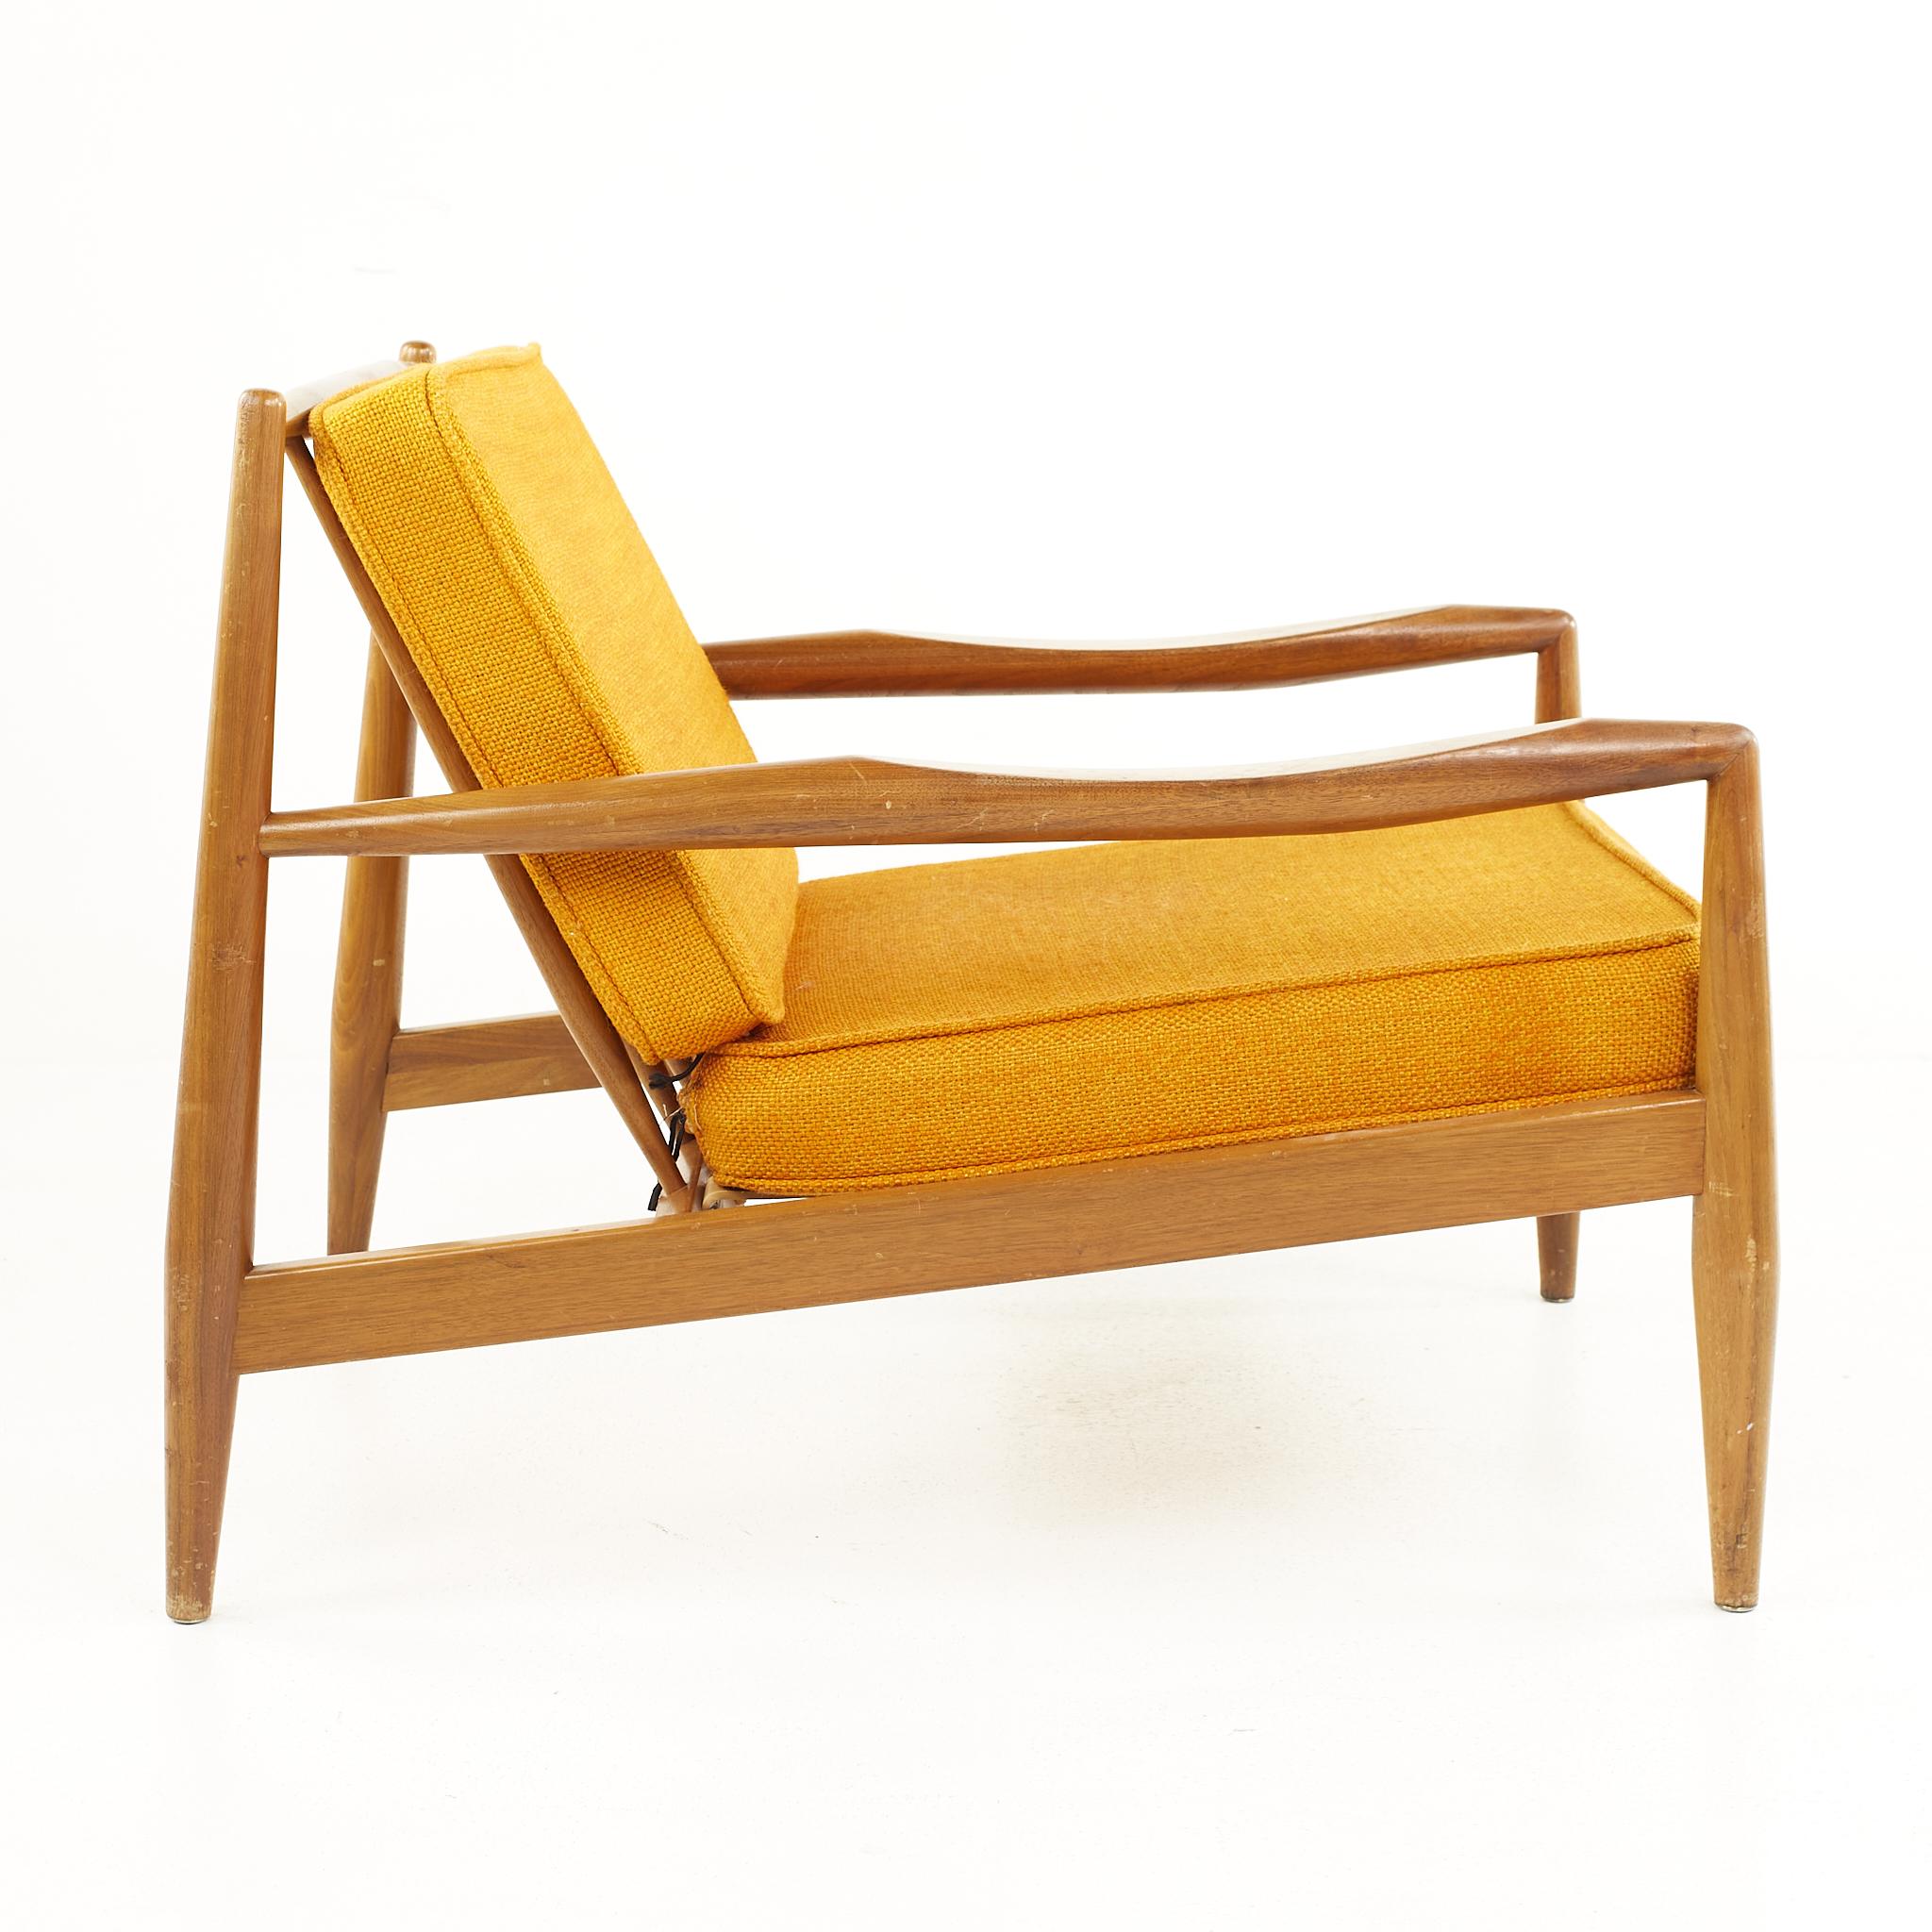 Late 20th Century Adrian Pearsall for Craft Associates Mid Century Spindle Back Lounge Chair For Sale